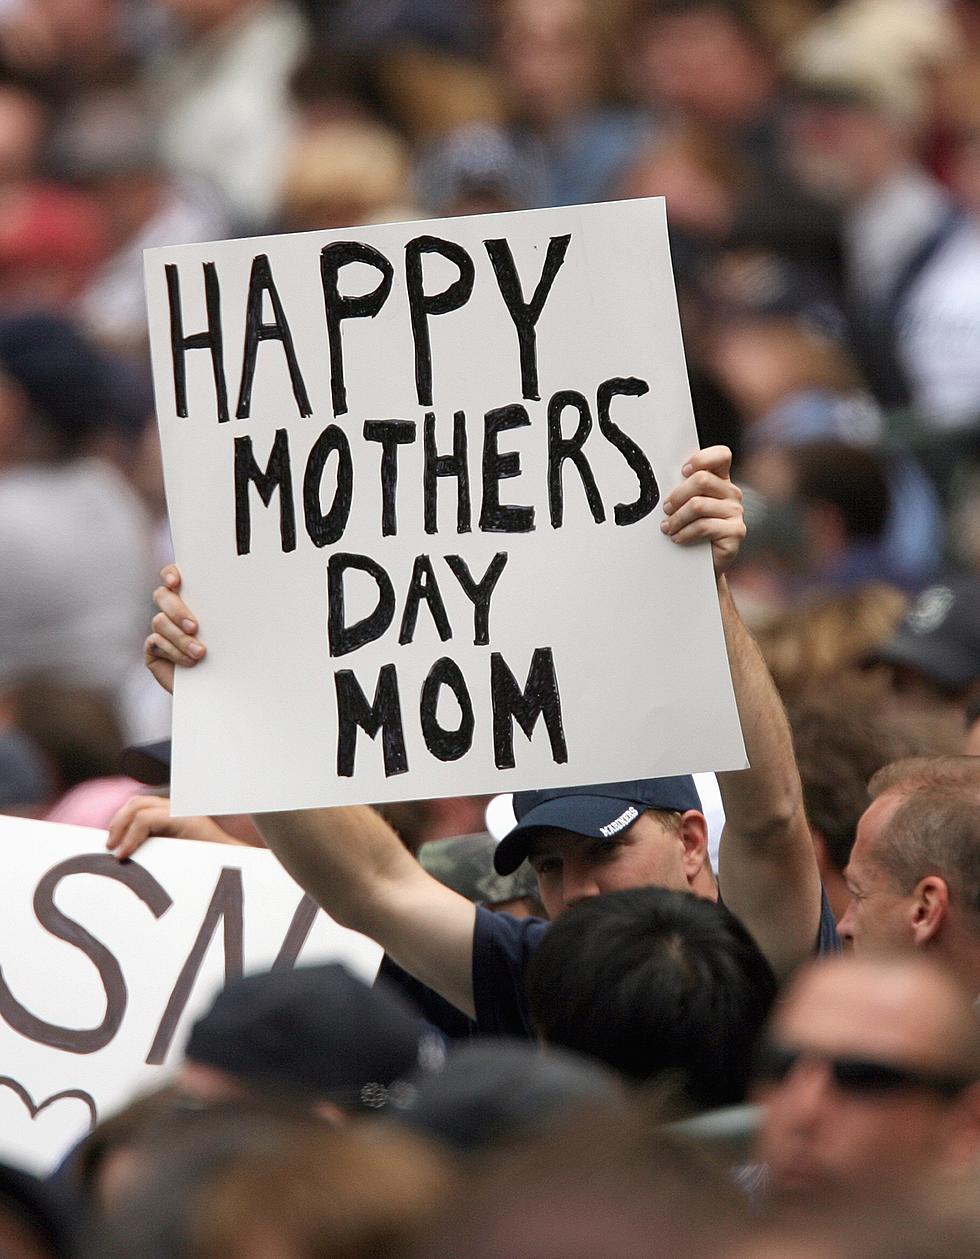 The Top 10 Best Gift Ideas For Mother’s Day